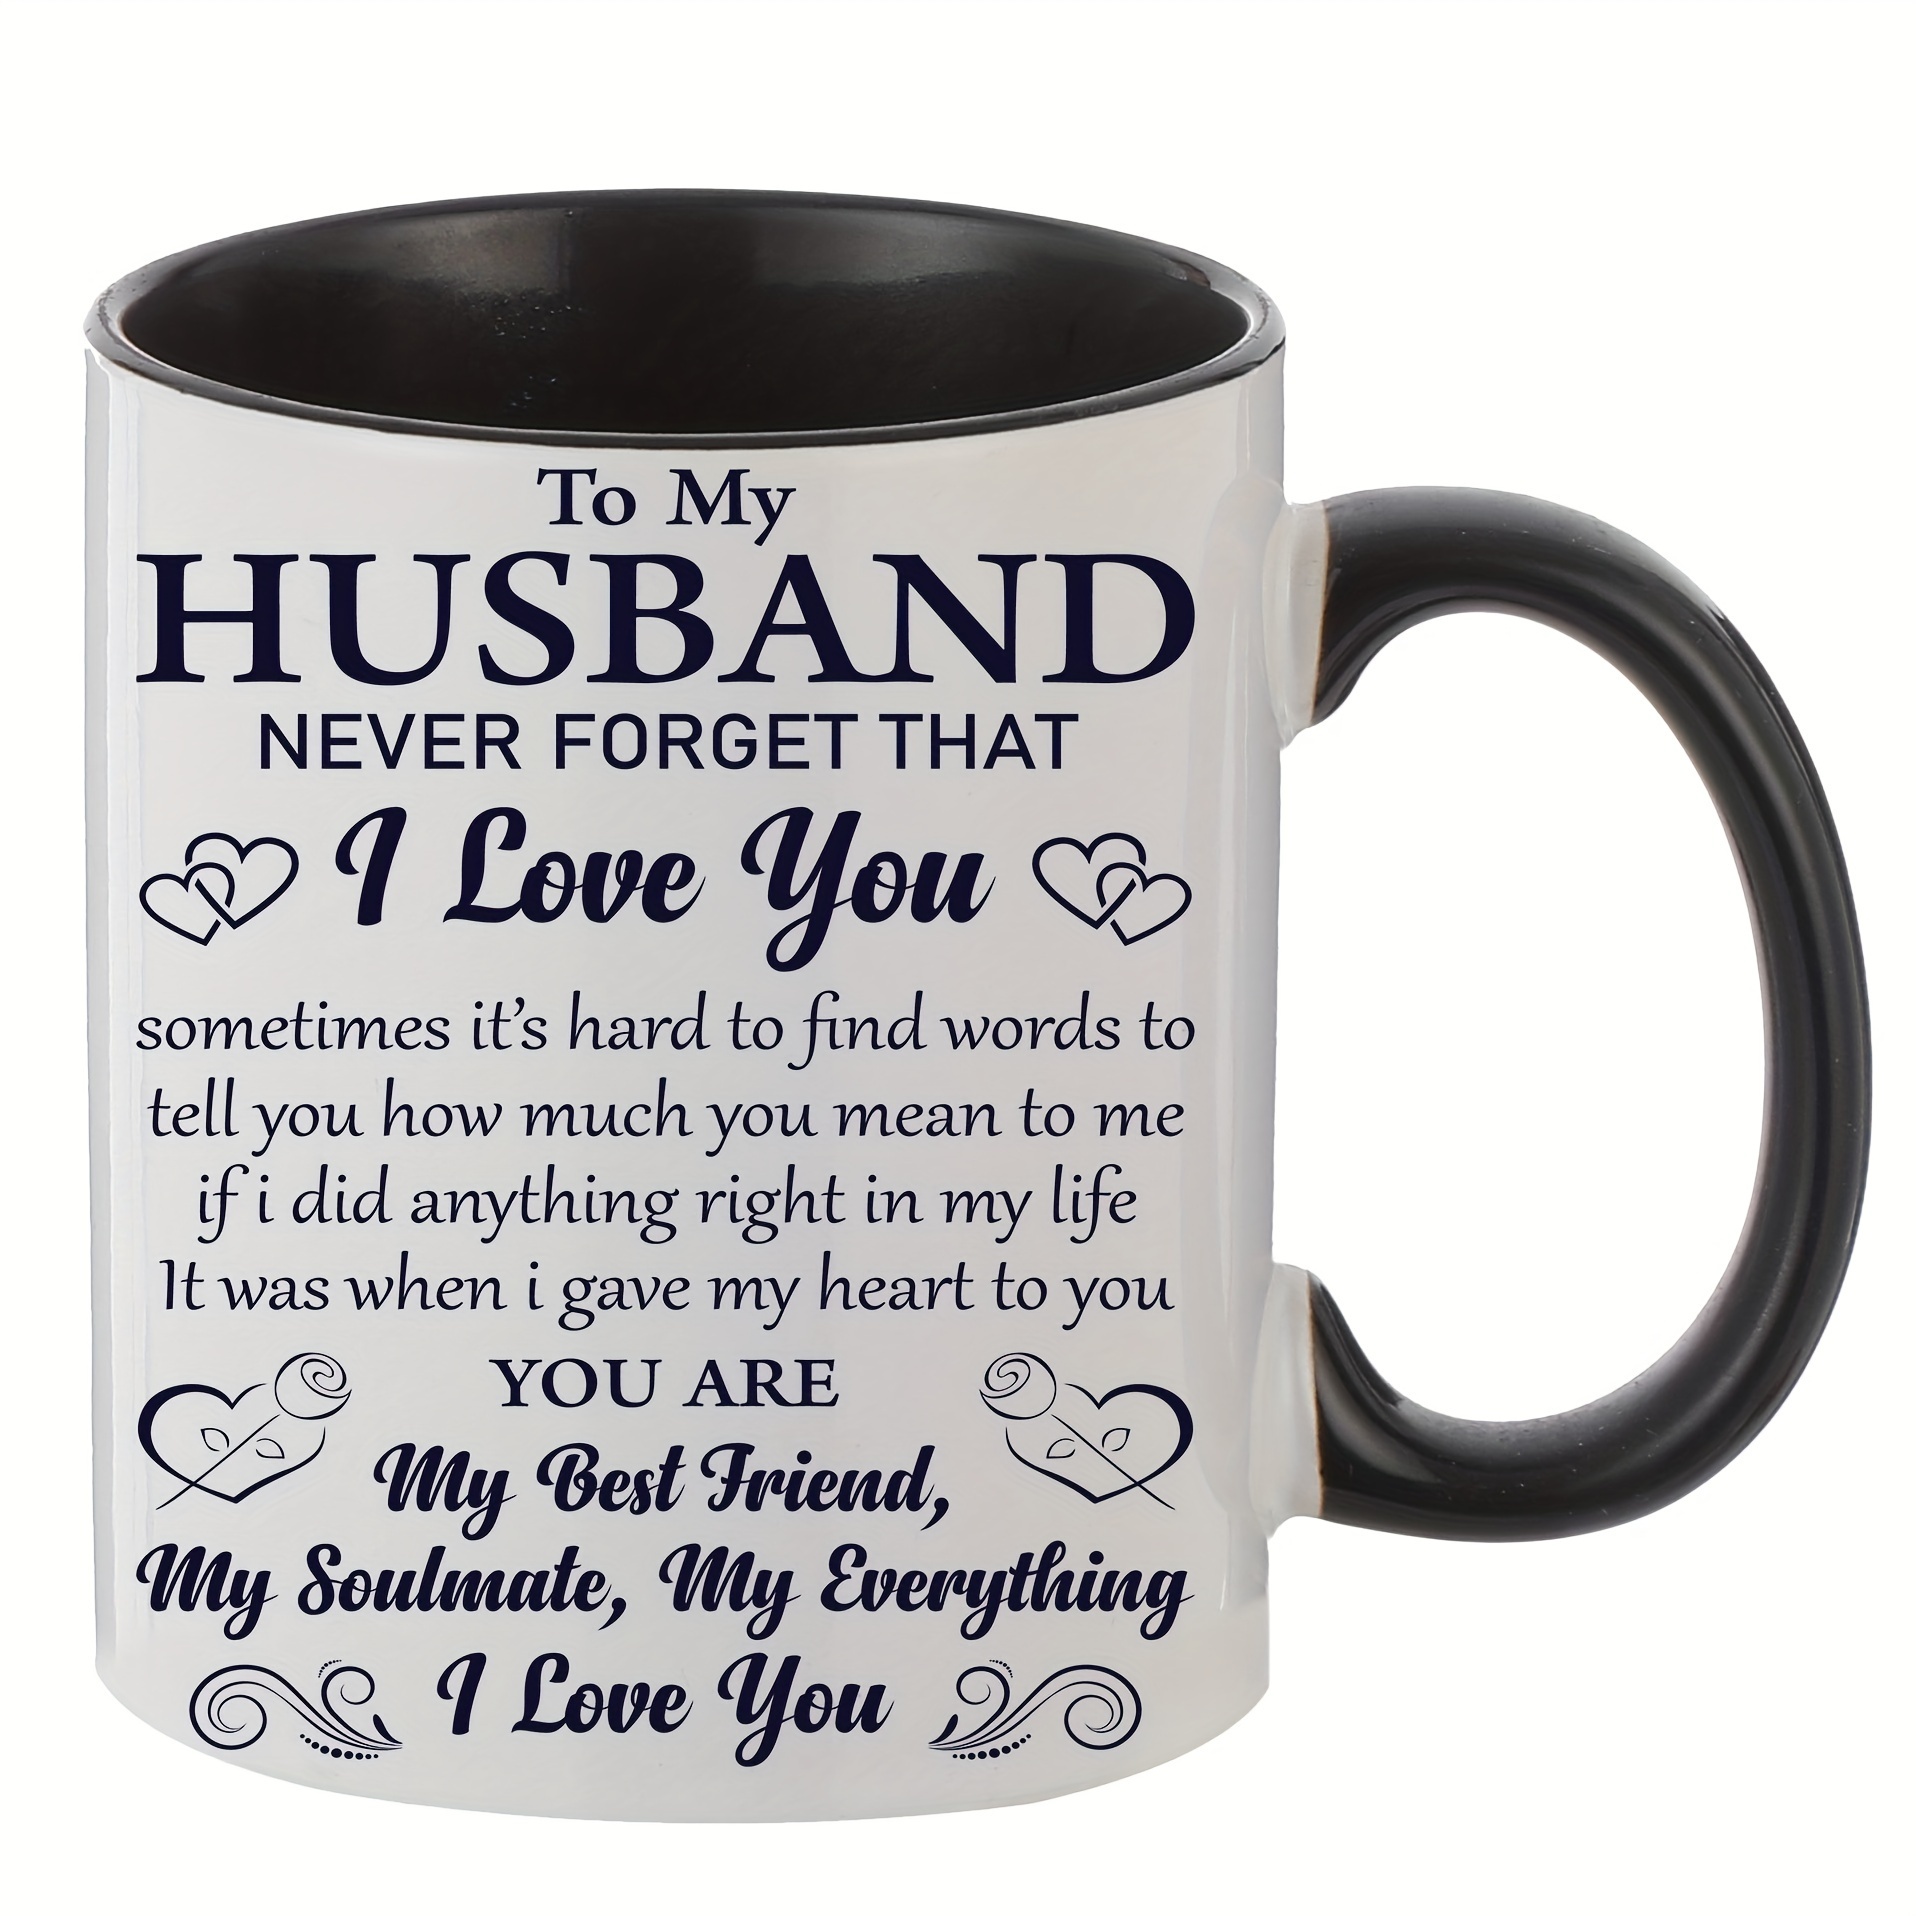 Mugs Coffee For Camping Lover Men Woman From Family Friends Gifts